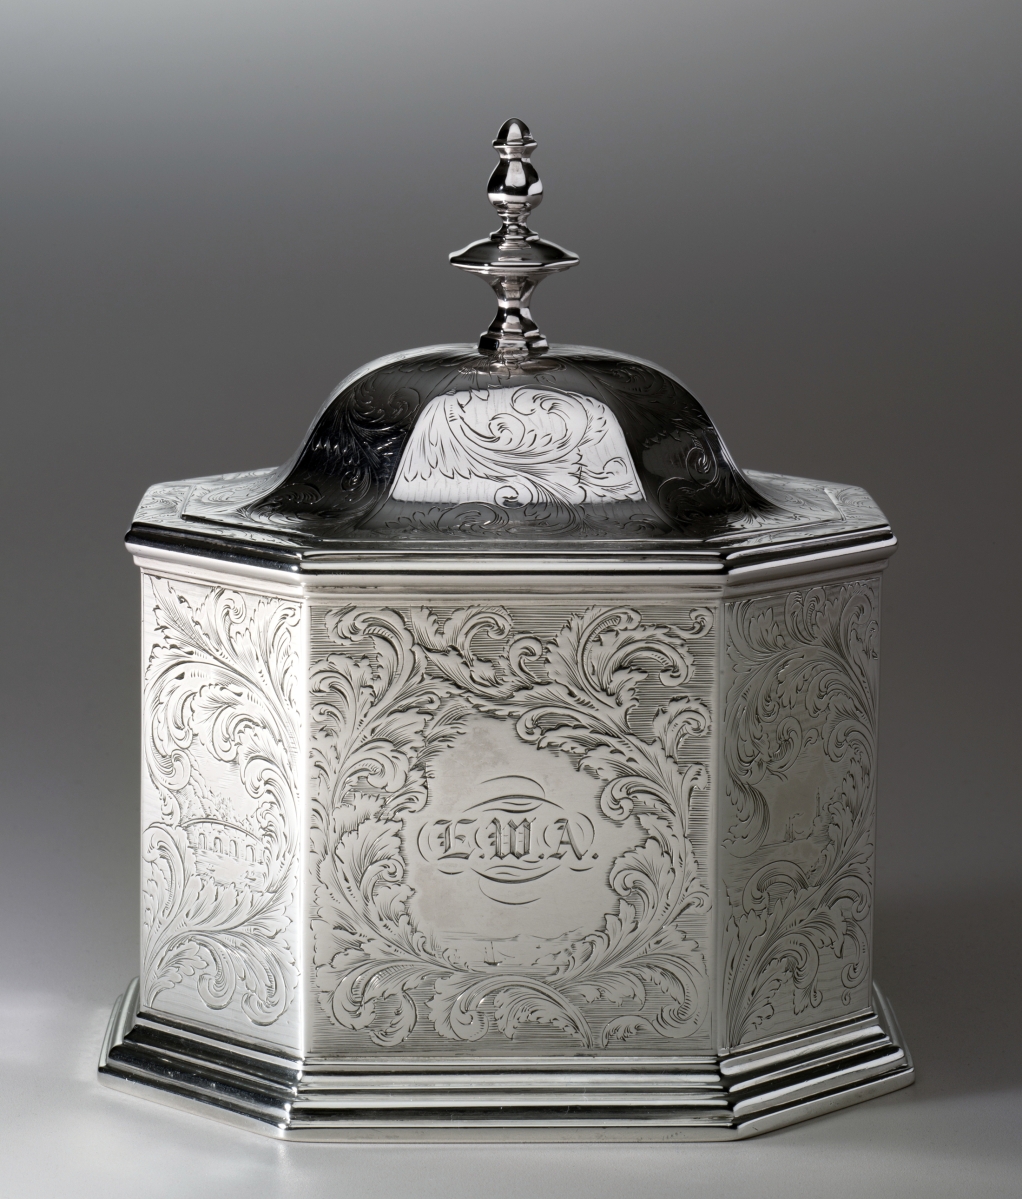 Obadiah Rich (active 1830–50) tea canister, Boston, 1845, silver; Clark Art Institute, bequest of Henry Morris and Elizabeth H. Burrows.